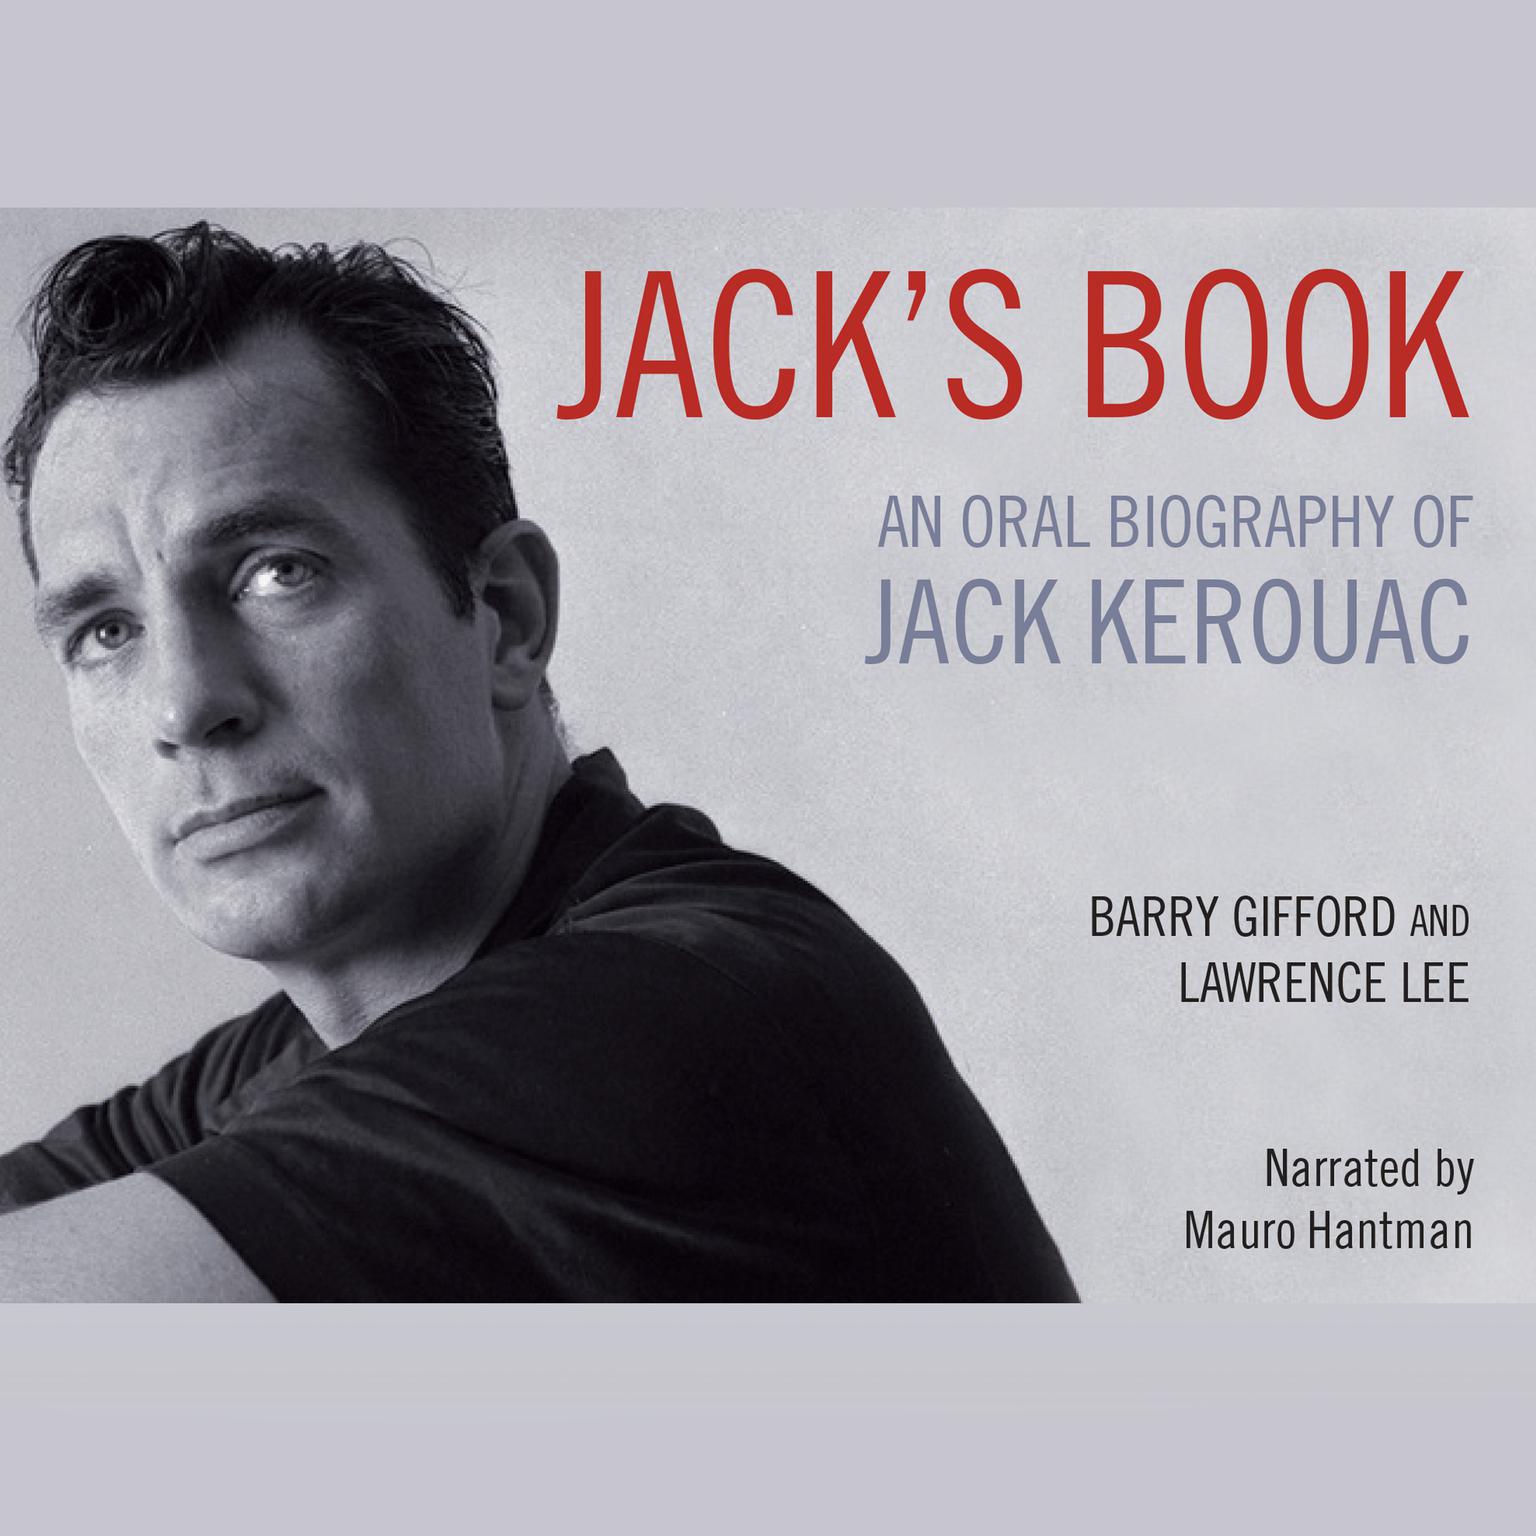 Jack’s Book: An Oral Biography of Jack Kerouac Audiobook, by Barry Gifford